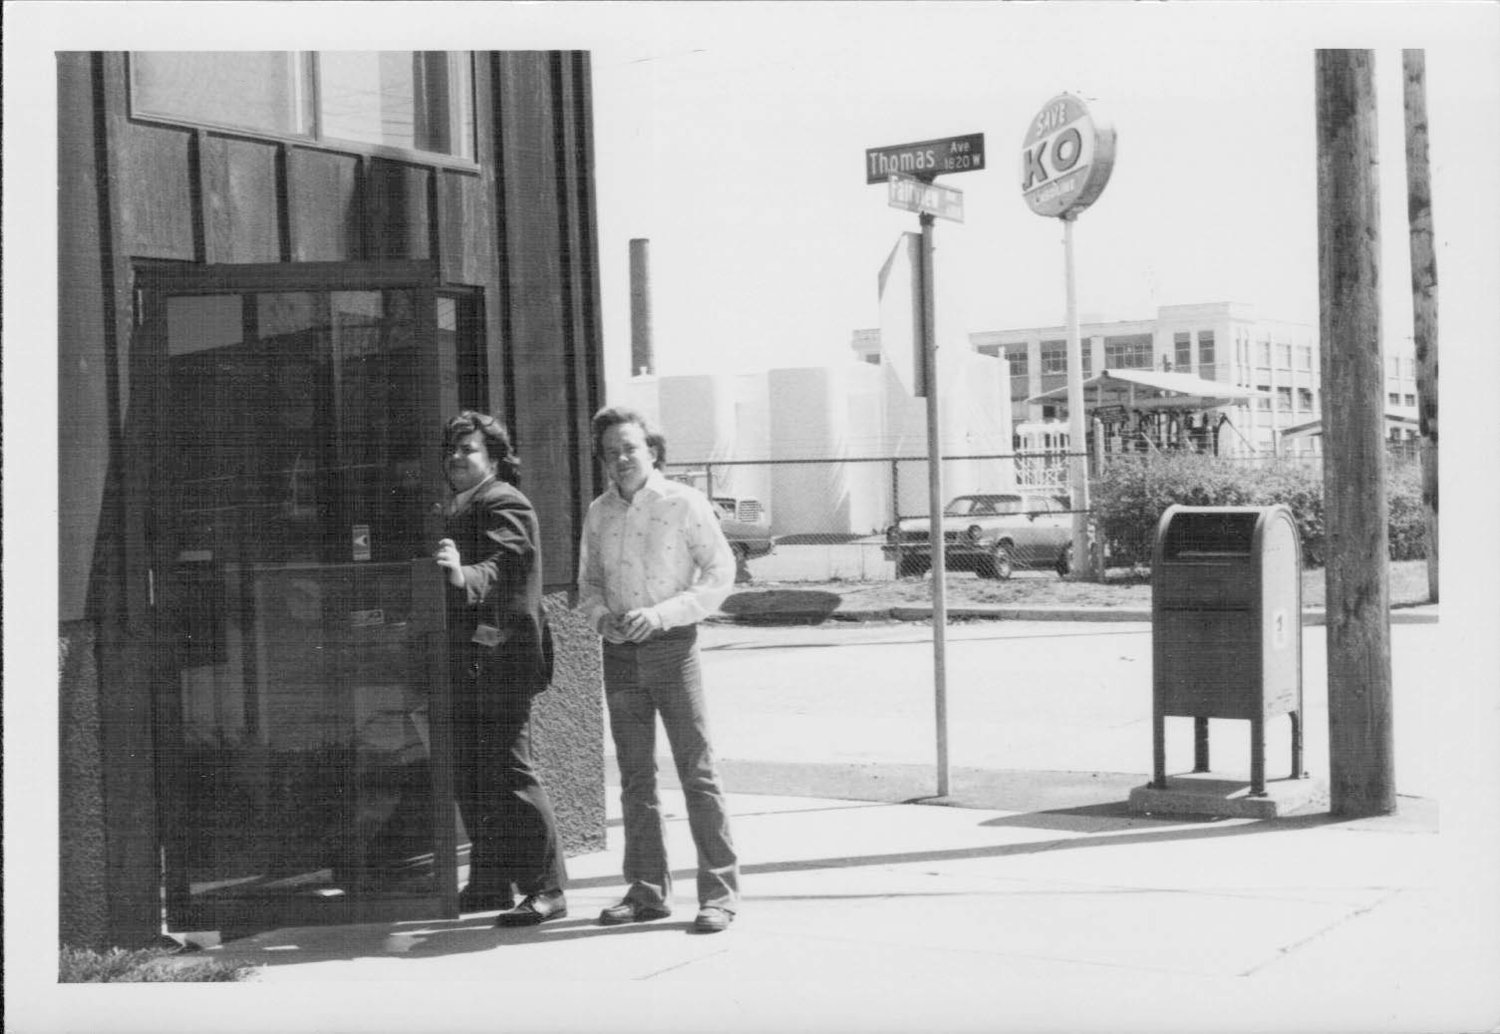 Cal deRuyter and Tim Nelson of deRuyter Nelson Publications at the first office they paid for, 600 Fairview in St. Paul.